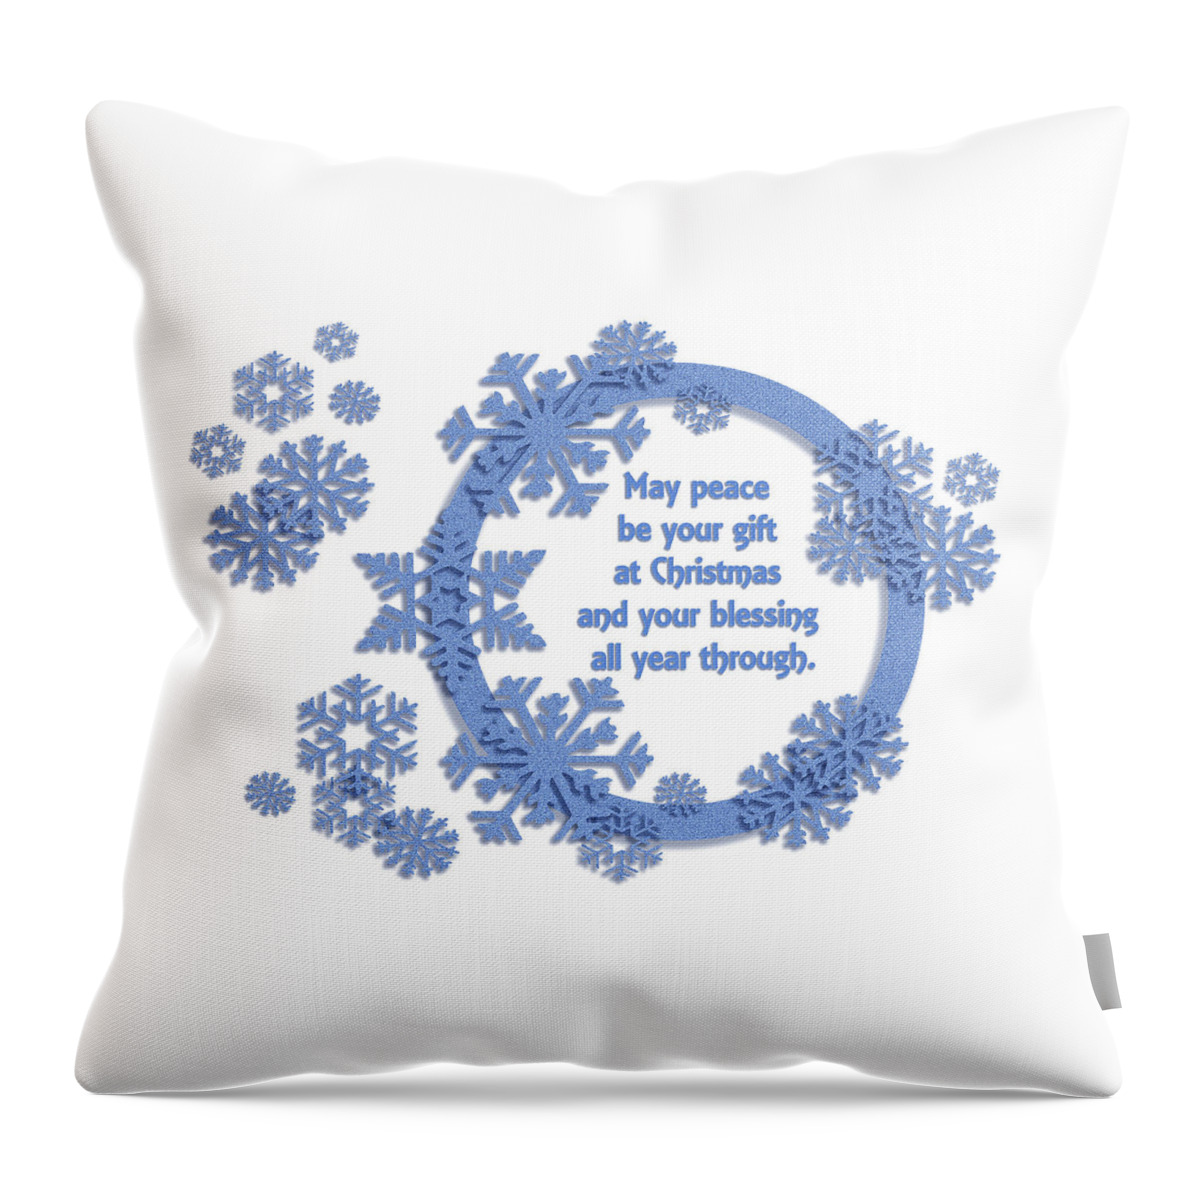 Christmas Greeting Throw Pillow featuring the digital art Christmas - May Peace Be Your Gift by Leslie Montgomery